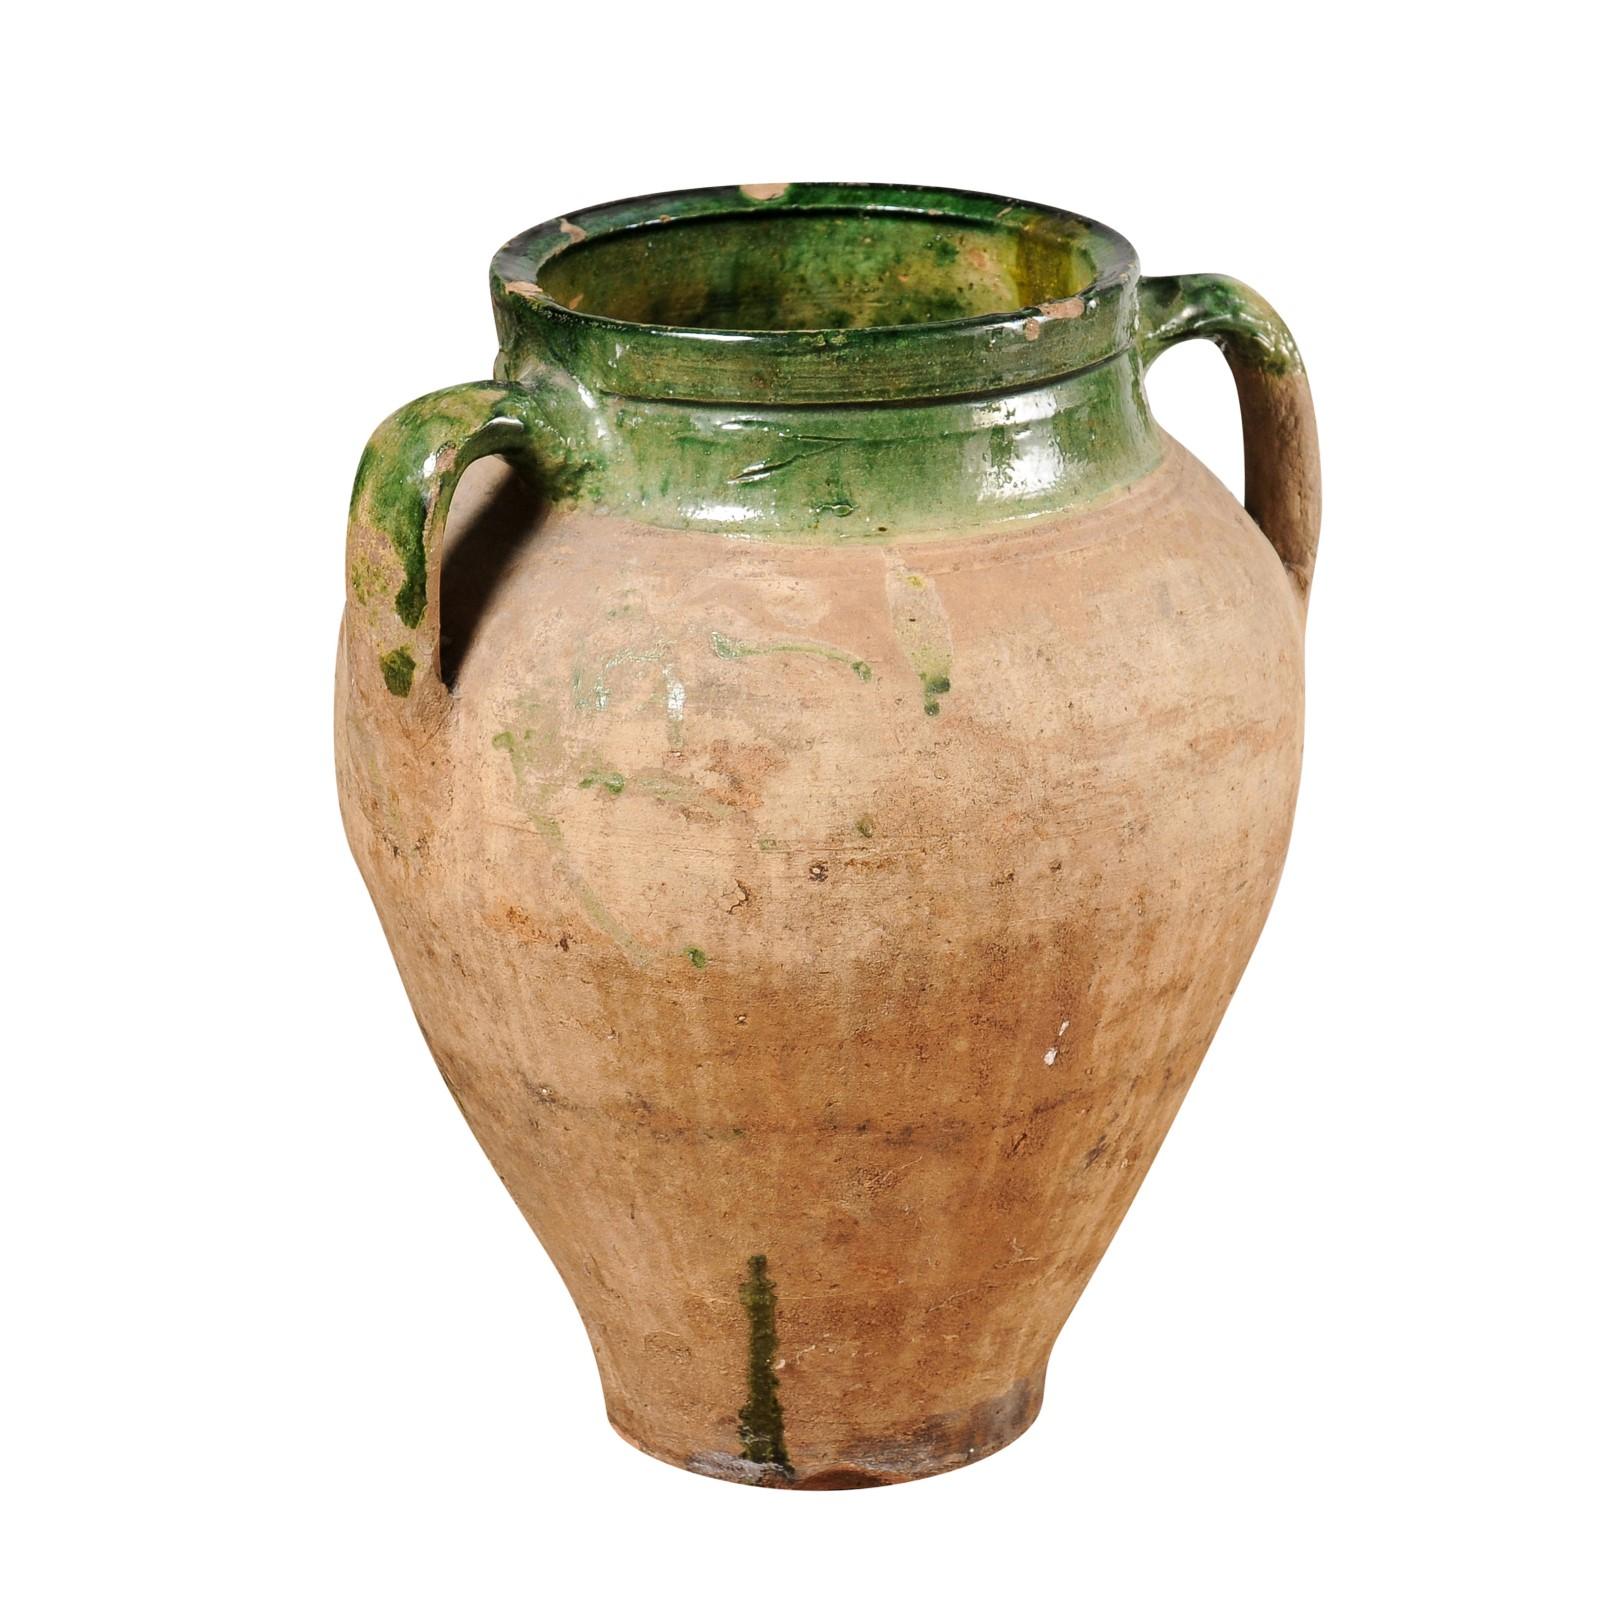 An English terracotta olive oil jar from circa 1930 with green glaze, two handles and rustic character. Discover the rustic elegance of this English terracotta olive oil jar, dating back to circa 1930, a piece steeped in history and character. This